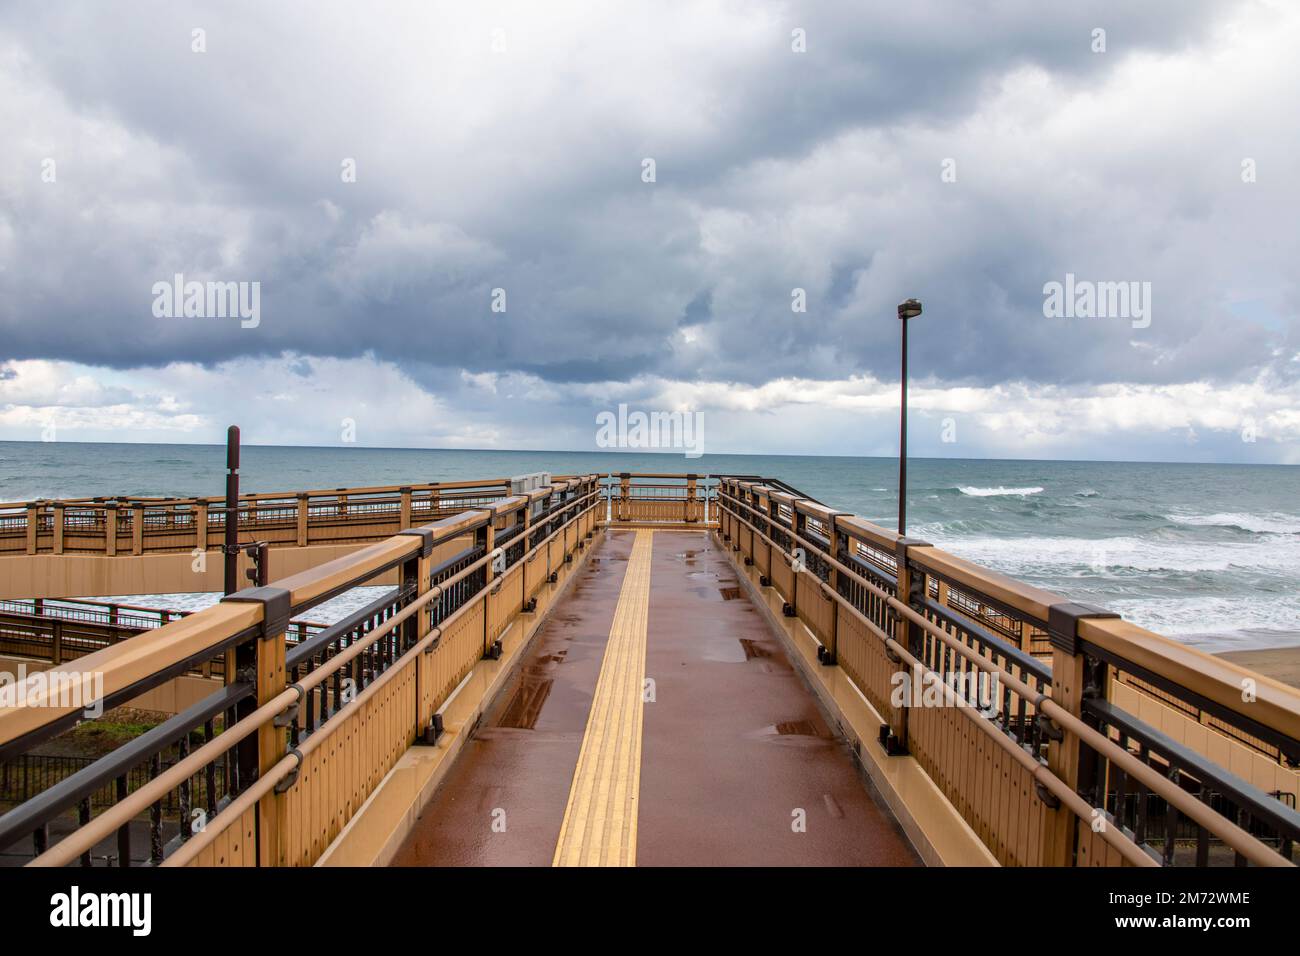 the pedestrian bridge to Hakuto Coast in Tottori Japan. It has a beautiful sandy beach and an impressive view of the ocean stretching to the horizon. Stock Photo